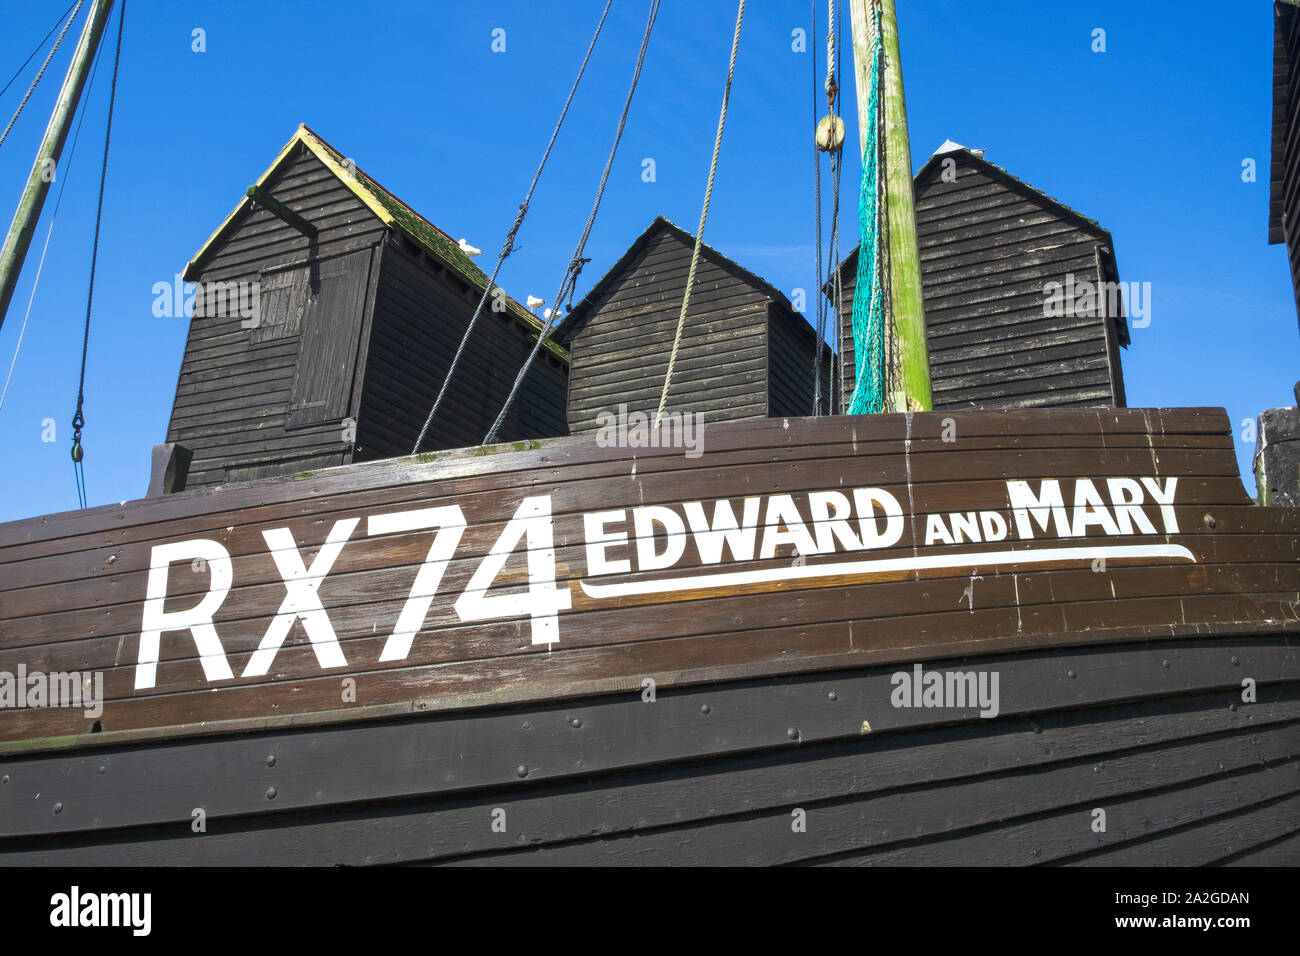 Old Fishing Boat, Edward and Mary, on display on Hastings Old Town Stade, open air Maritime Museum Heritage Quarter, Rock-a-Nore, East Sussex, UK Stock Photo